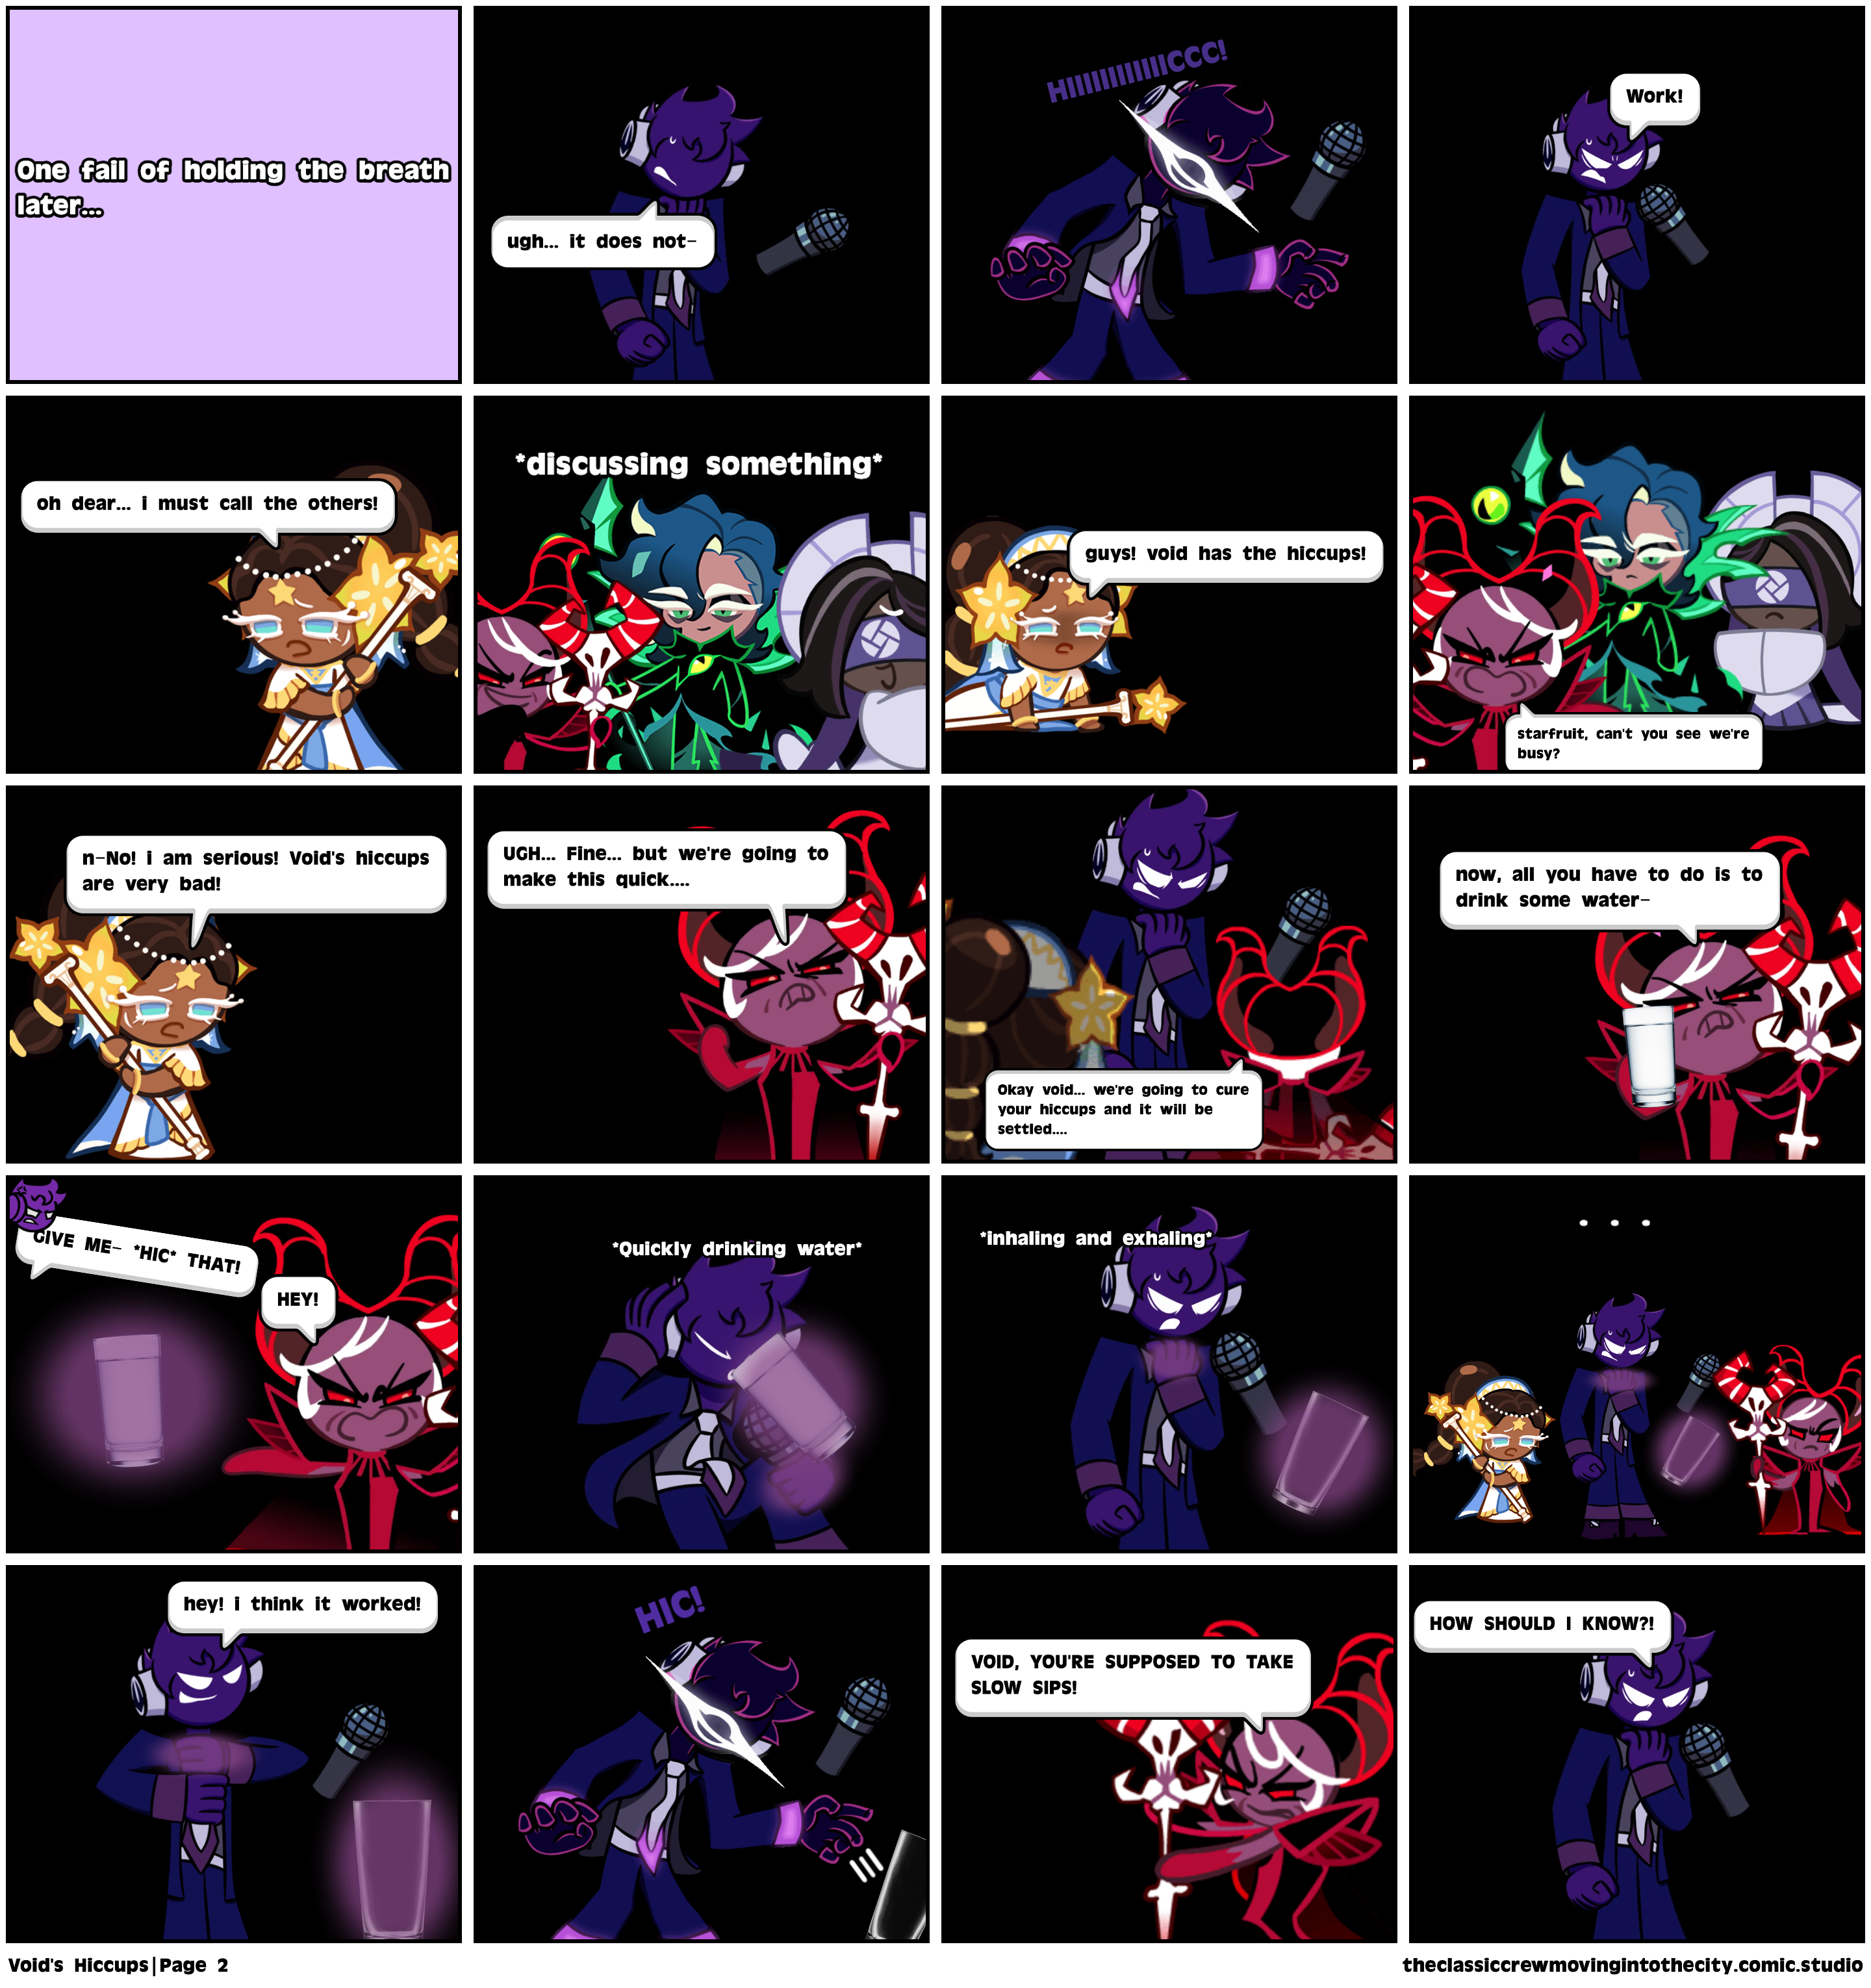 Void's Hiccups|Page 2